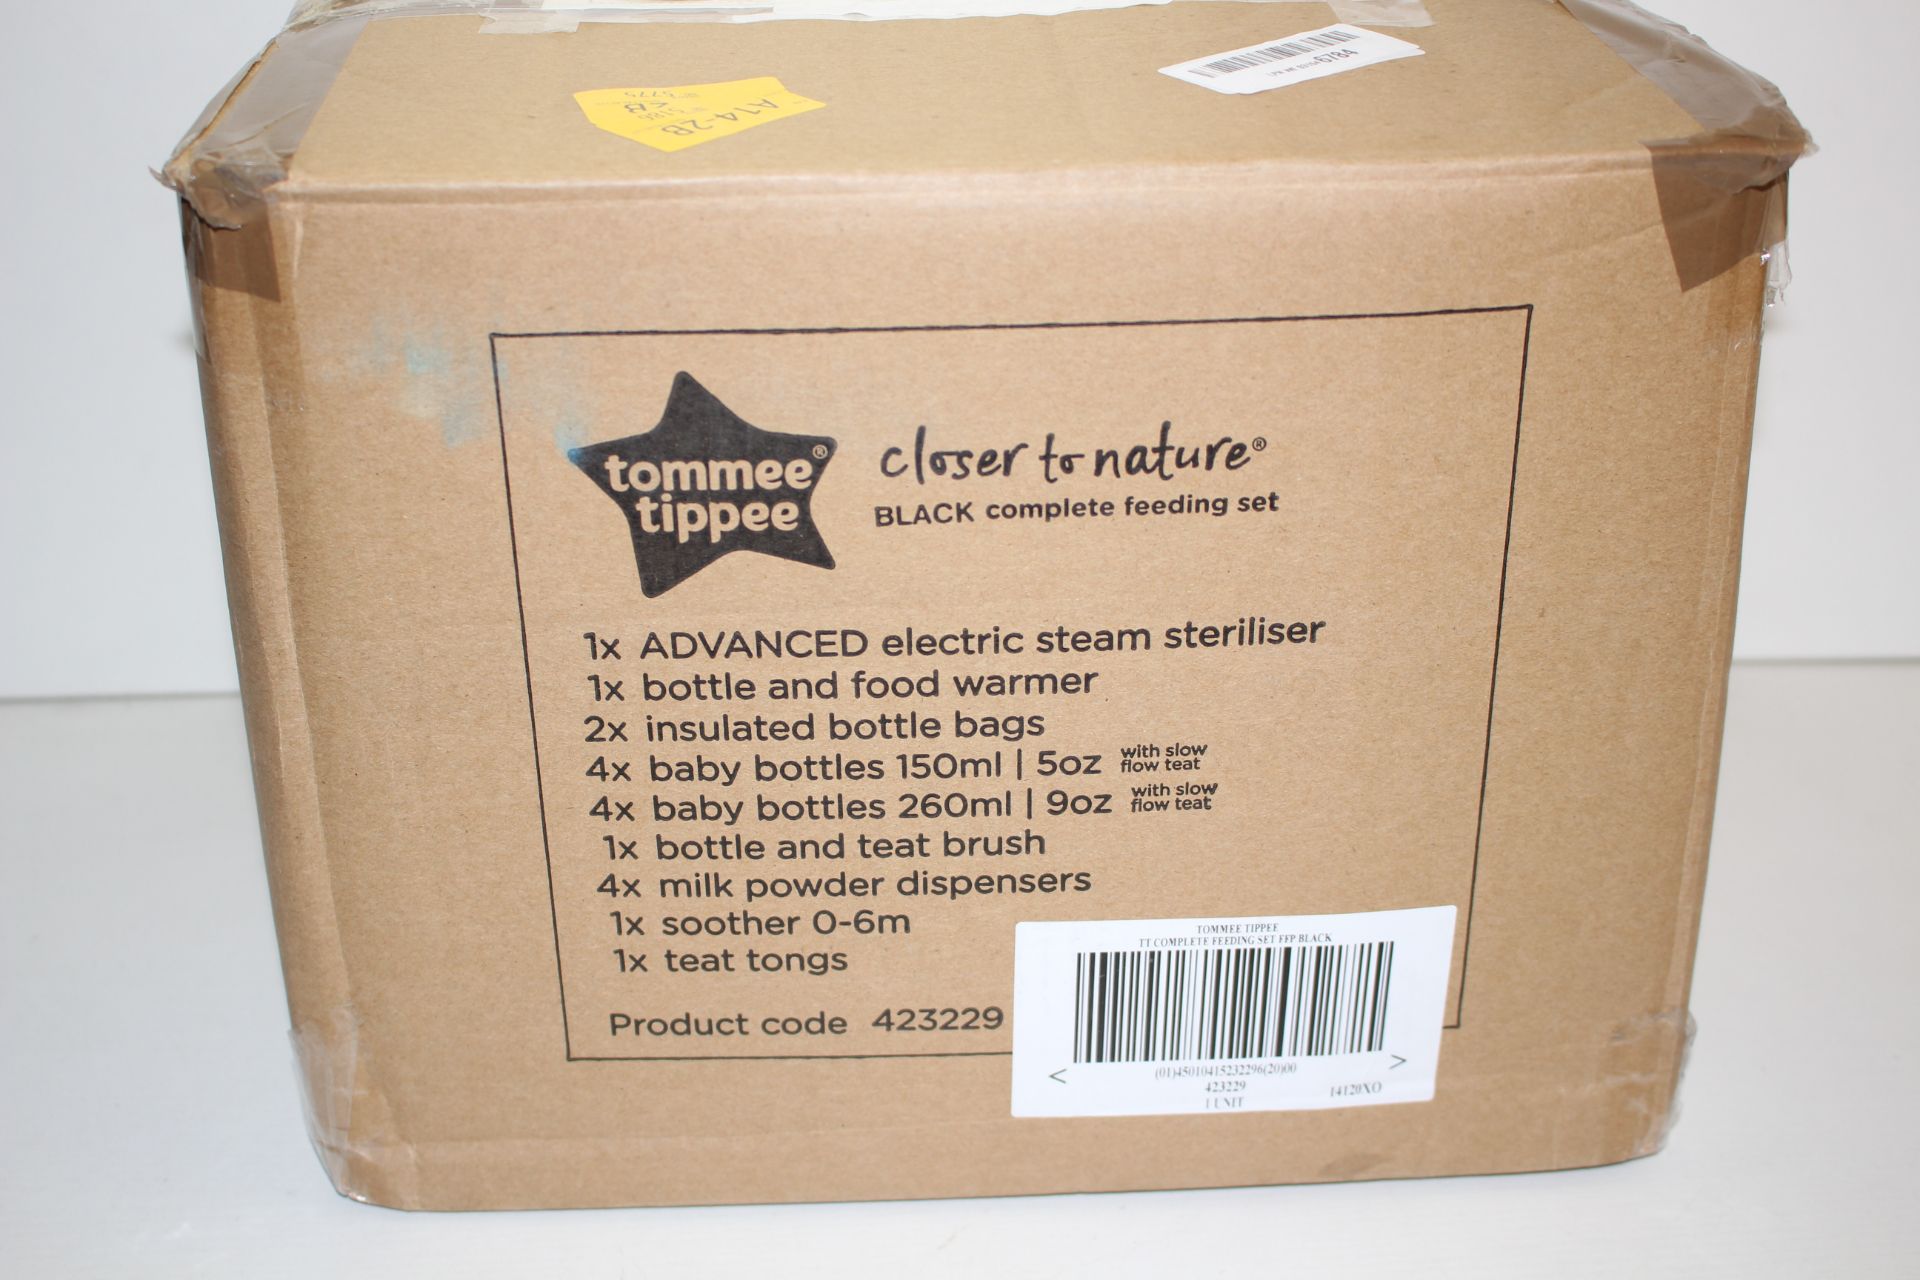 BOXED TOMMEE TIPPEE CLOSER TO NATURE COMPLETE FEEDING SET RRP £74.99Condition ReportAppraisal